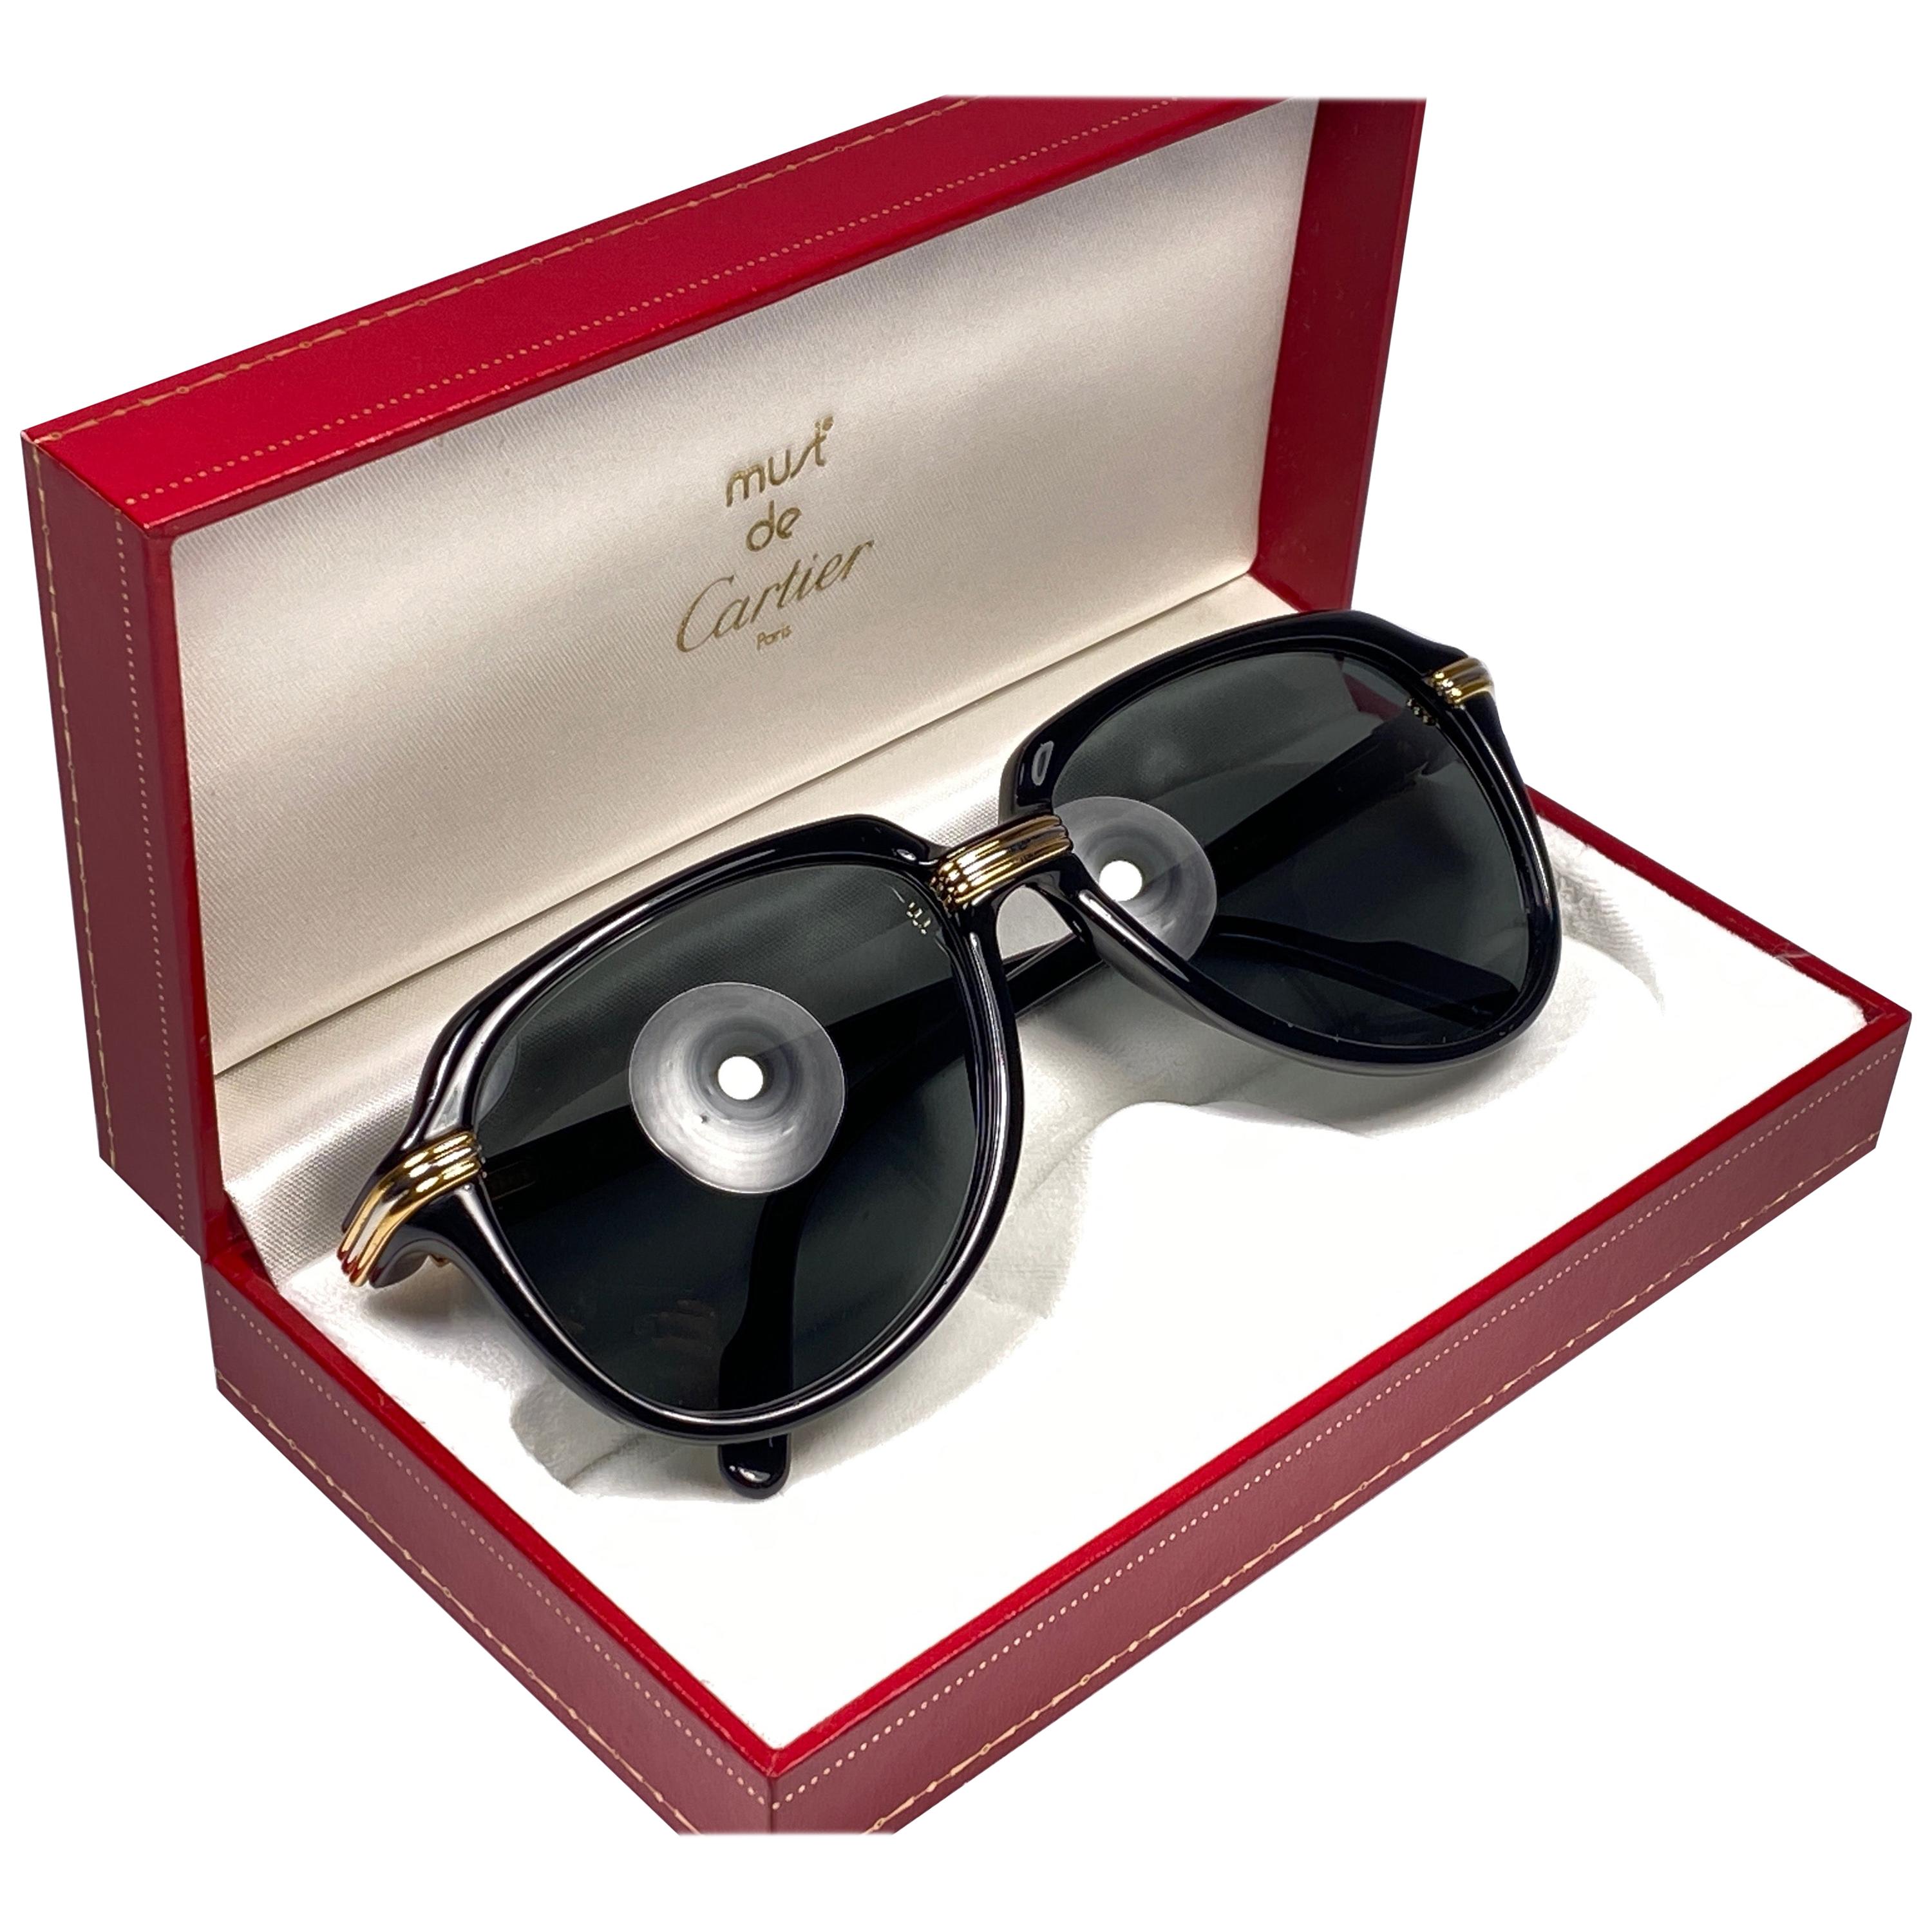 Mint Collectors Item. Unique and original Cartier Aviator Vitesse sunglasses, the black Edition with yellow and white gold accents. Lenses are spotless medium grey.
Frame is with the sides in gold. All hallmarks. Cartier gold signs on the ear